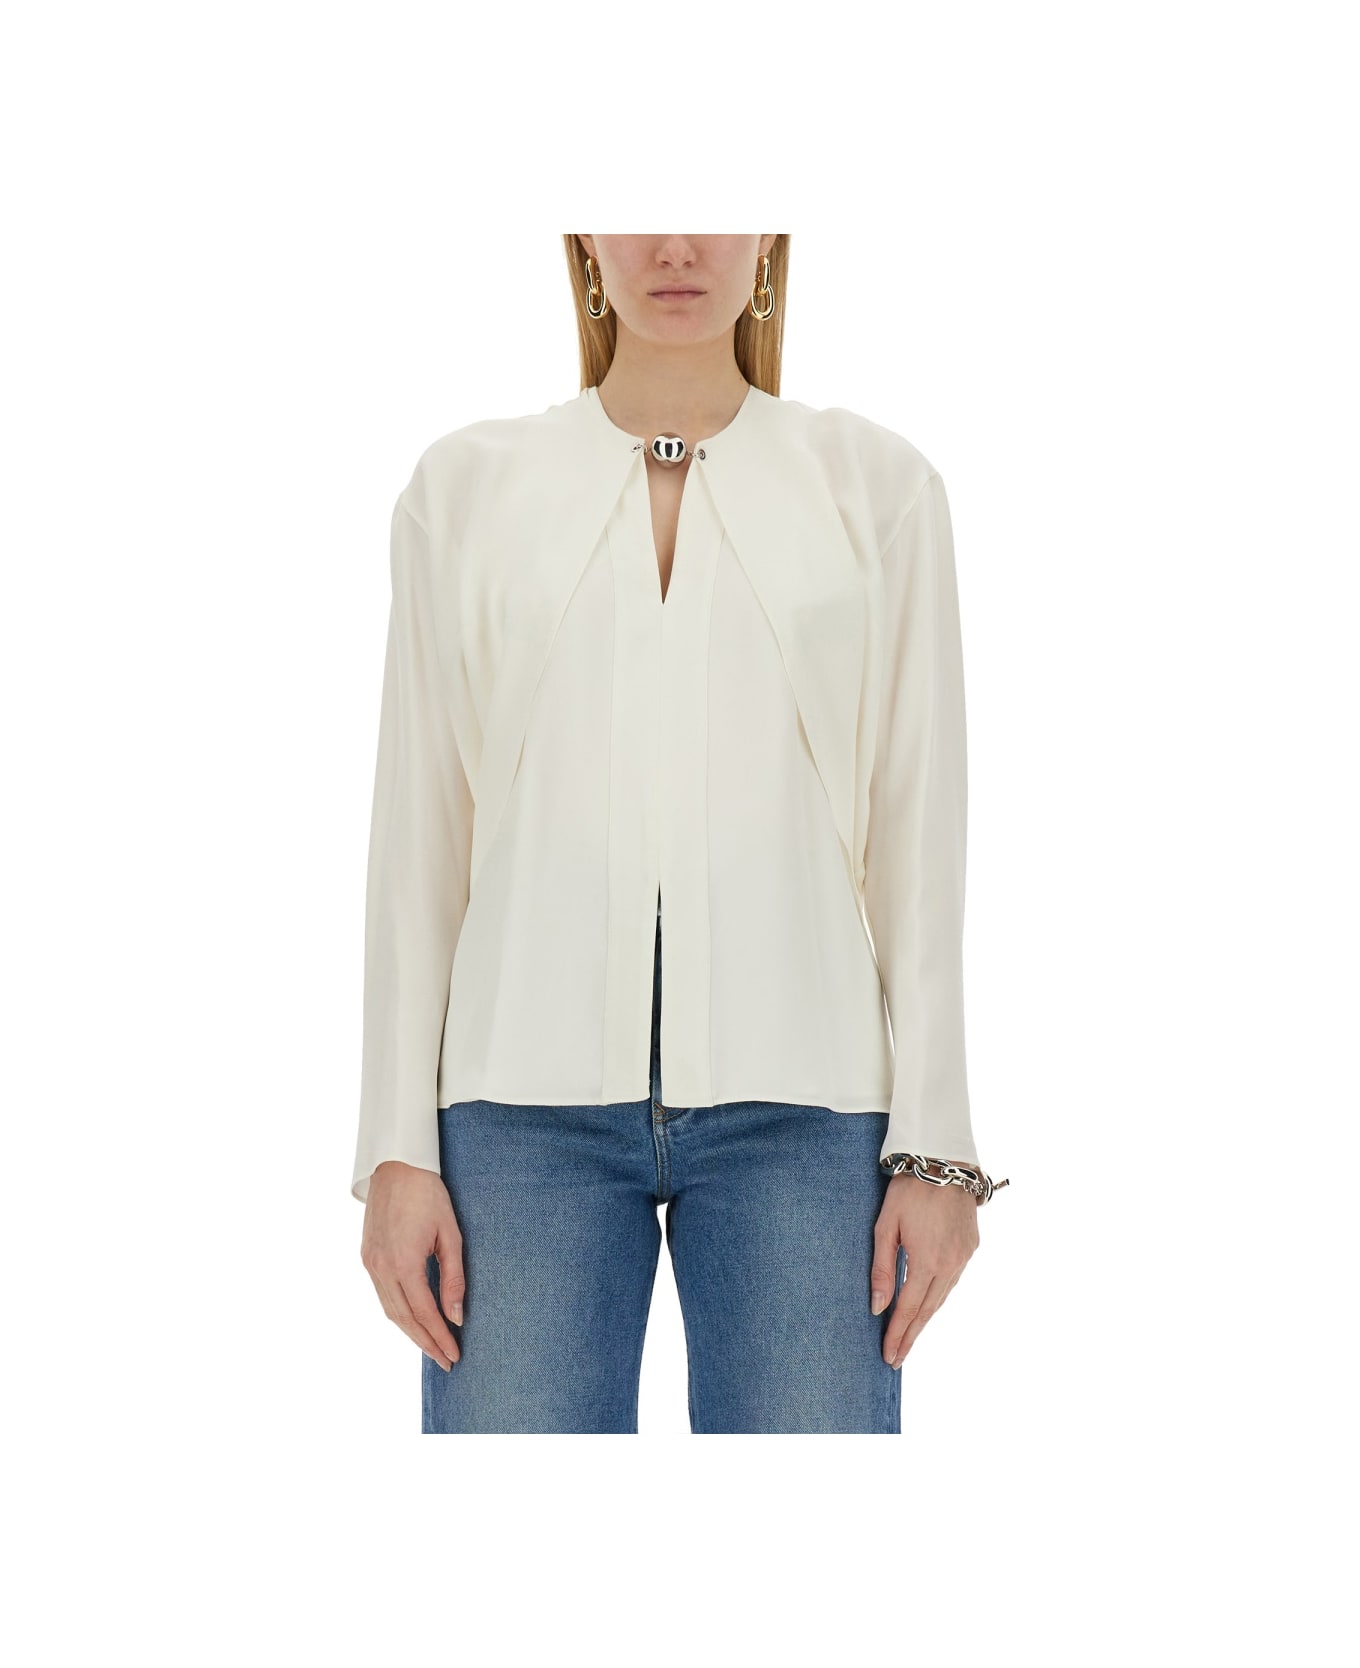 Paco Rabanne Blouse With Chain Detail - WHITE ブラウス